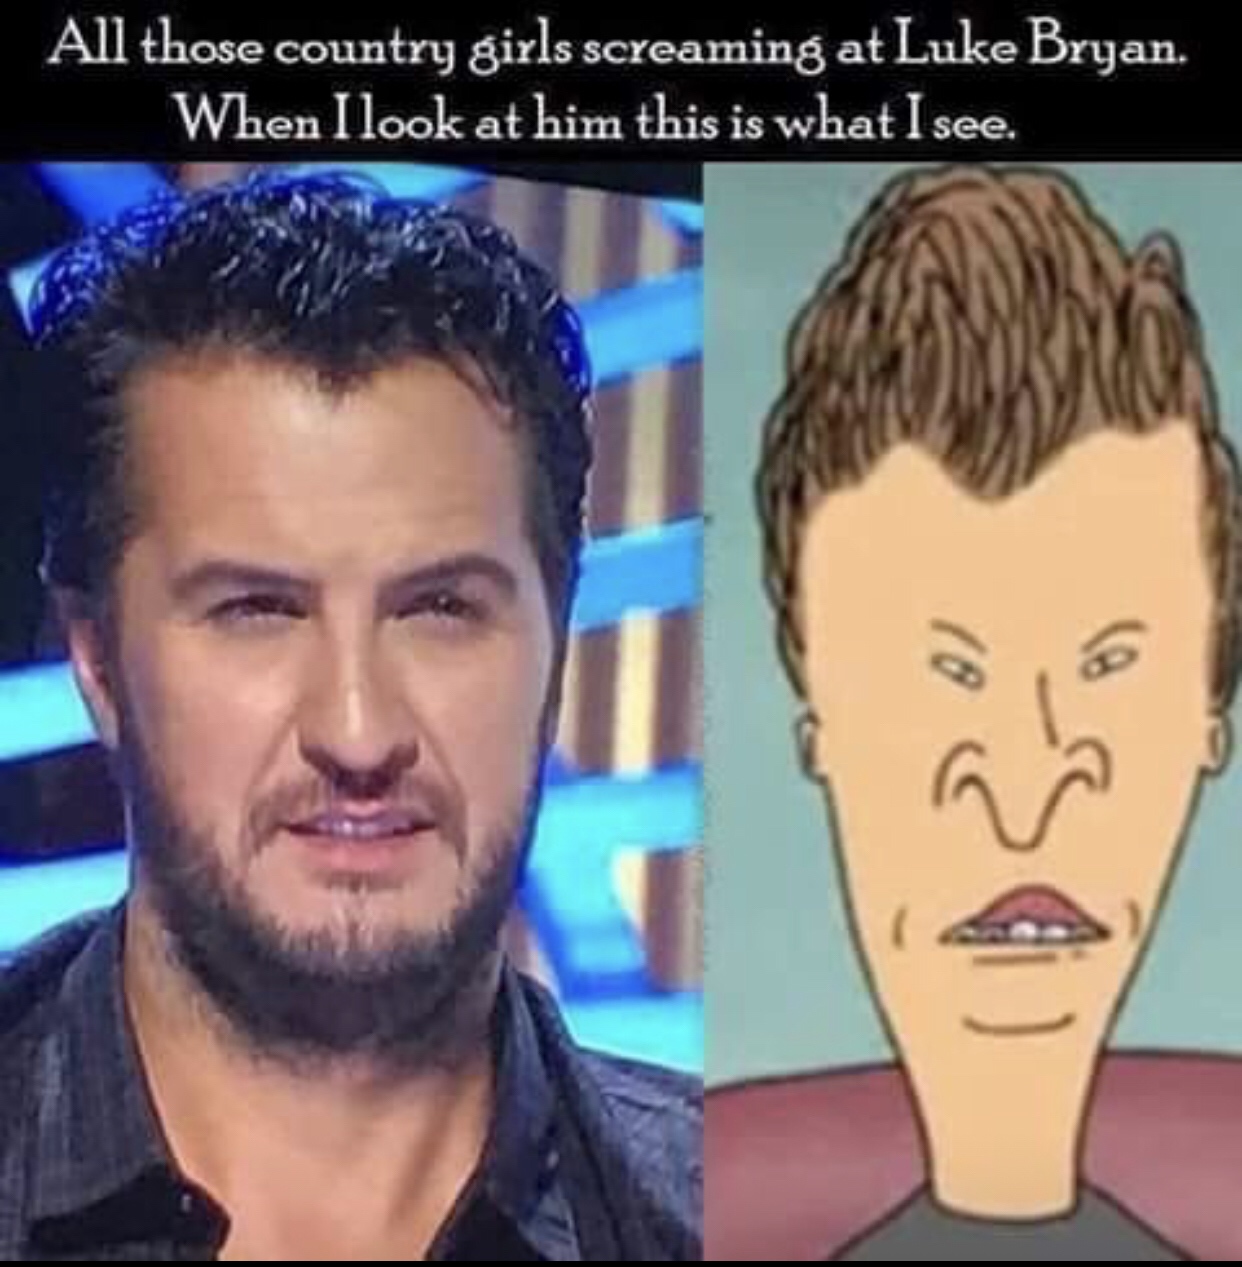 luke bryan beavis and butthead - All those country girls screaming at Luke Bryan. When I look at him this is what I see.